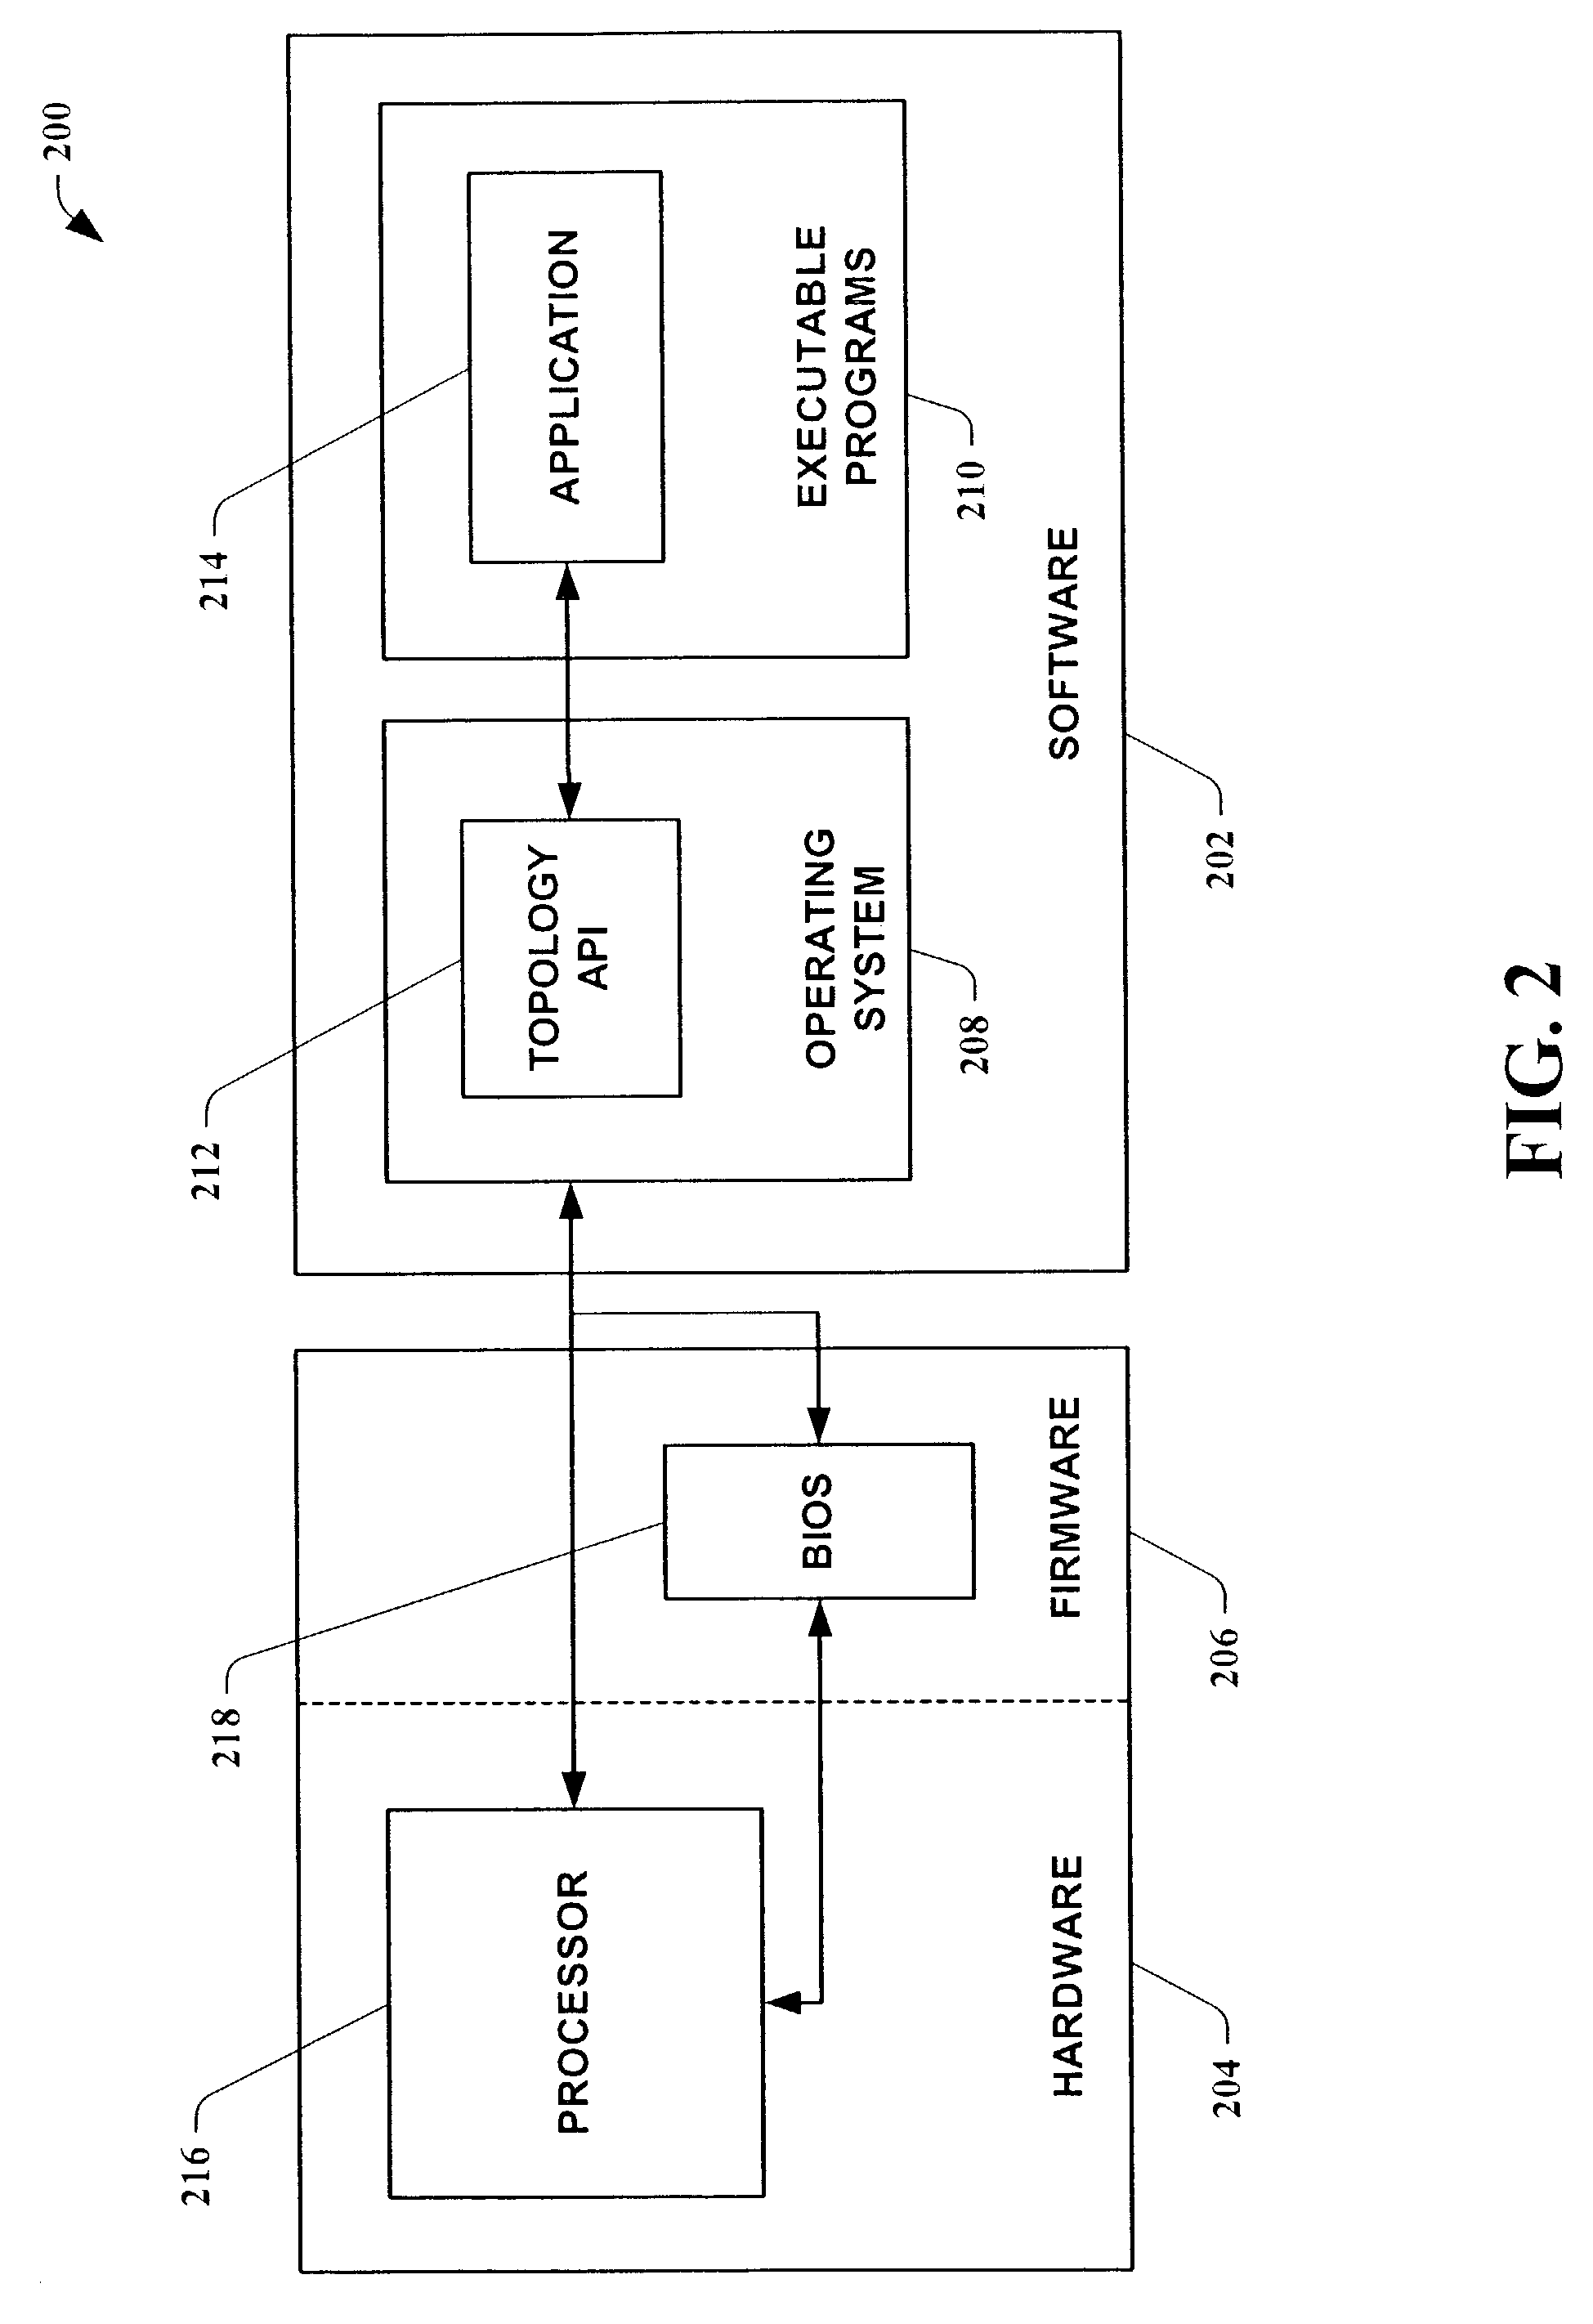 Systems, methods, and apparatus for indicating processor hierarchical topology